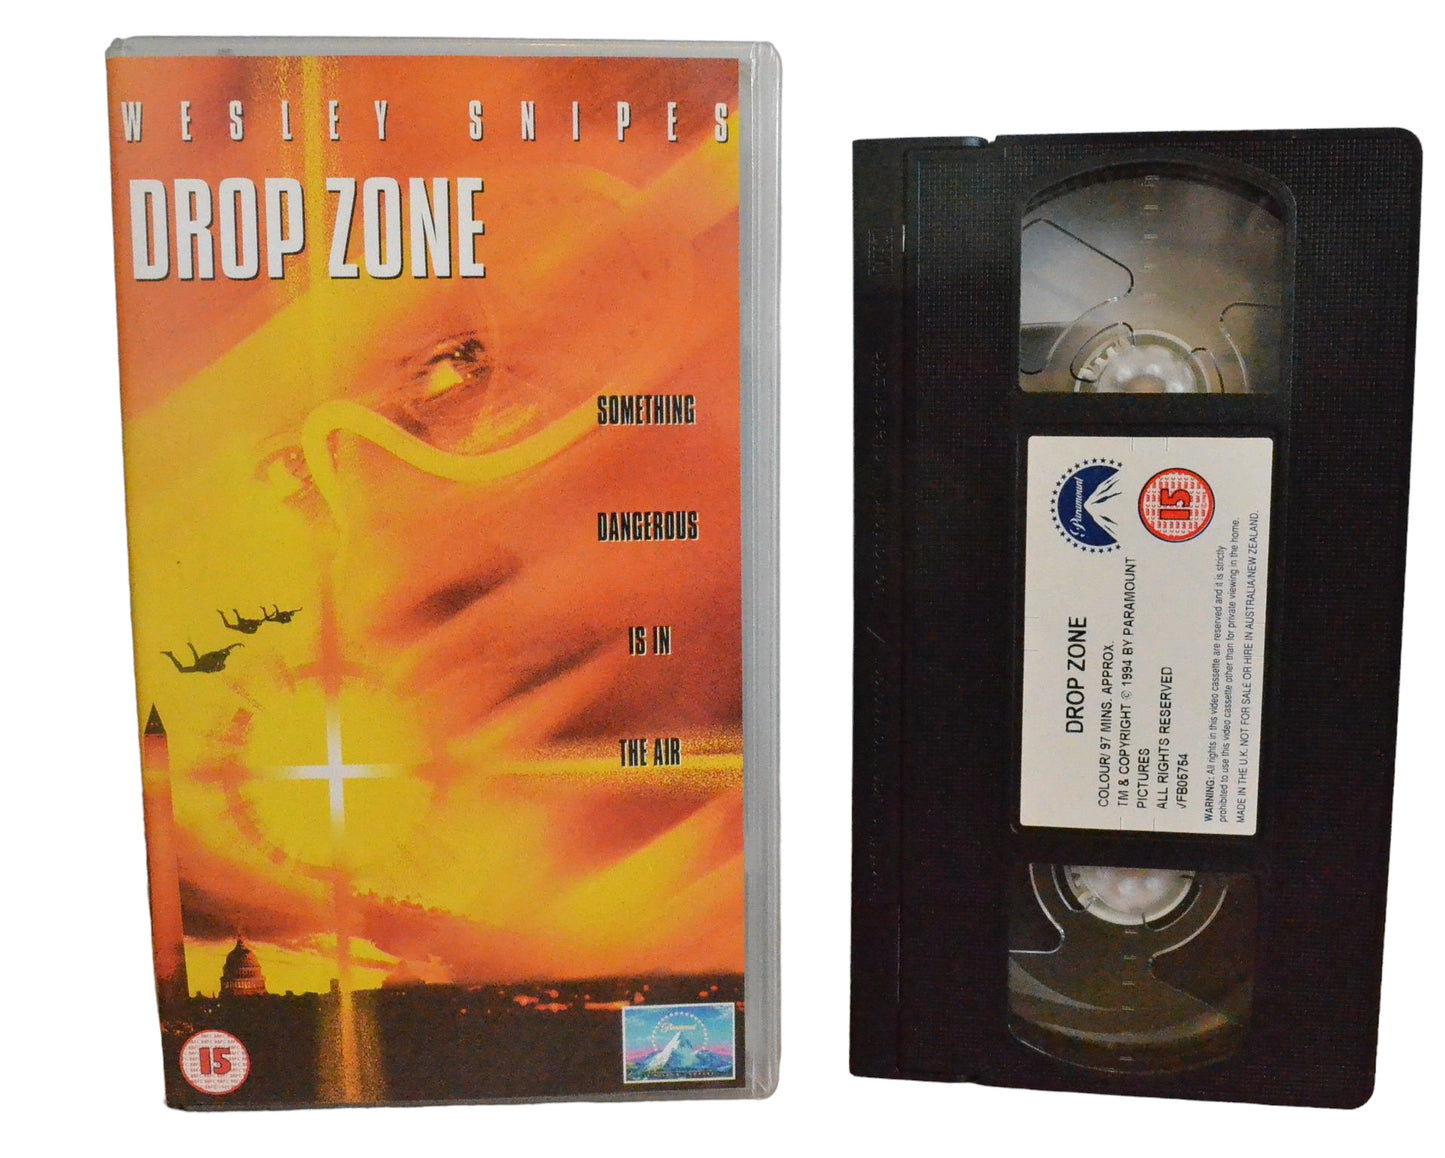 Drop Zone - Wesley Snipes - Paramount Pictures - VHR4120 - Action - Pal - VHS-